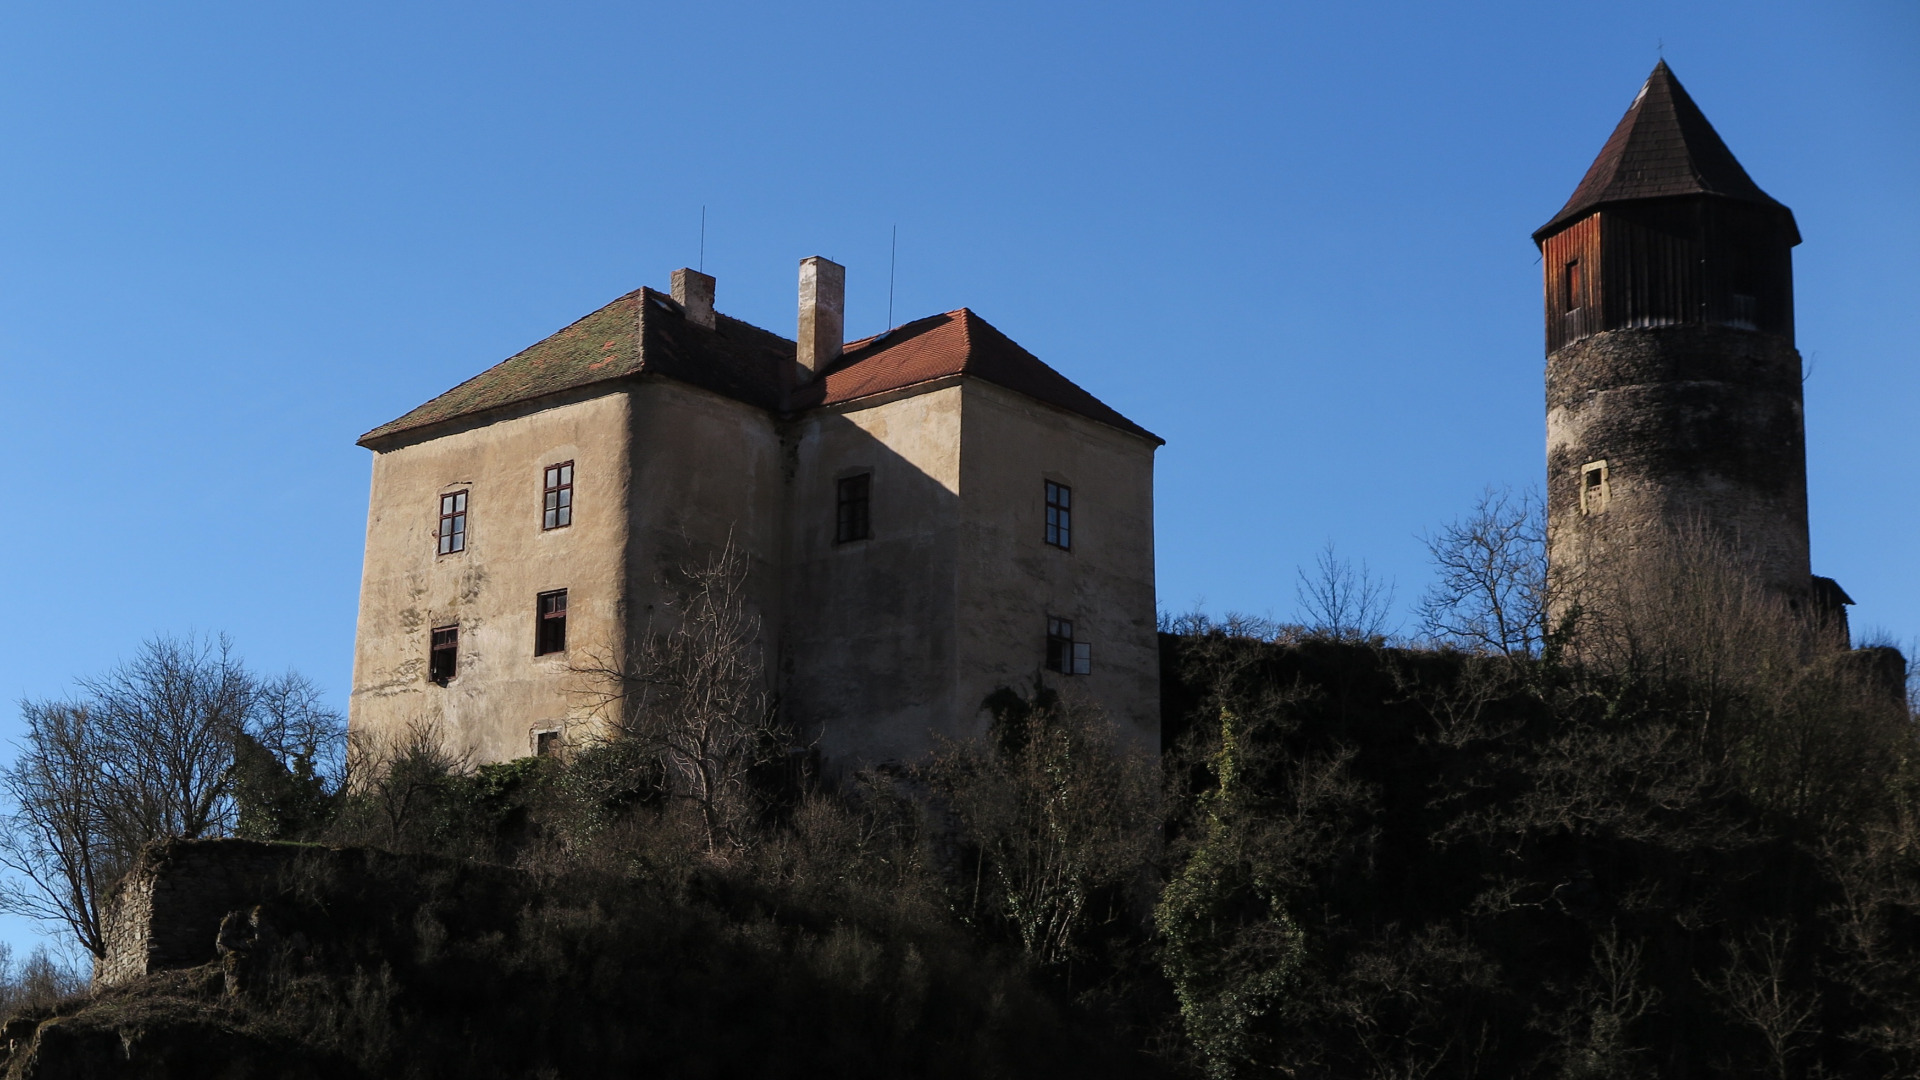 Photography 1 of project Pirkstein Castle